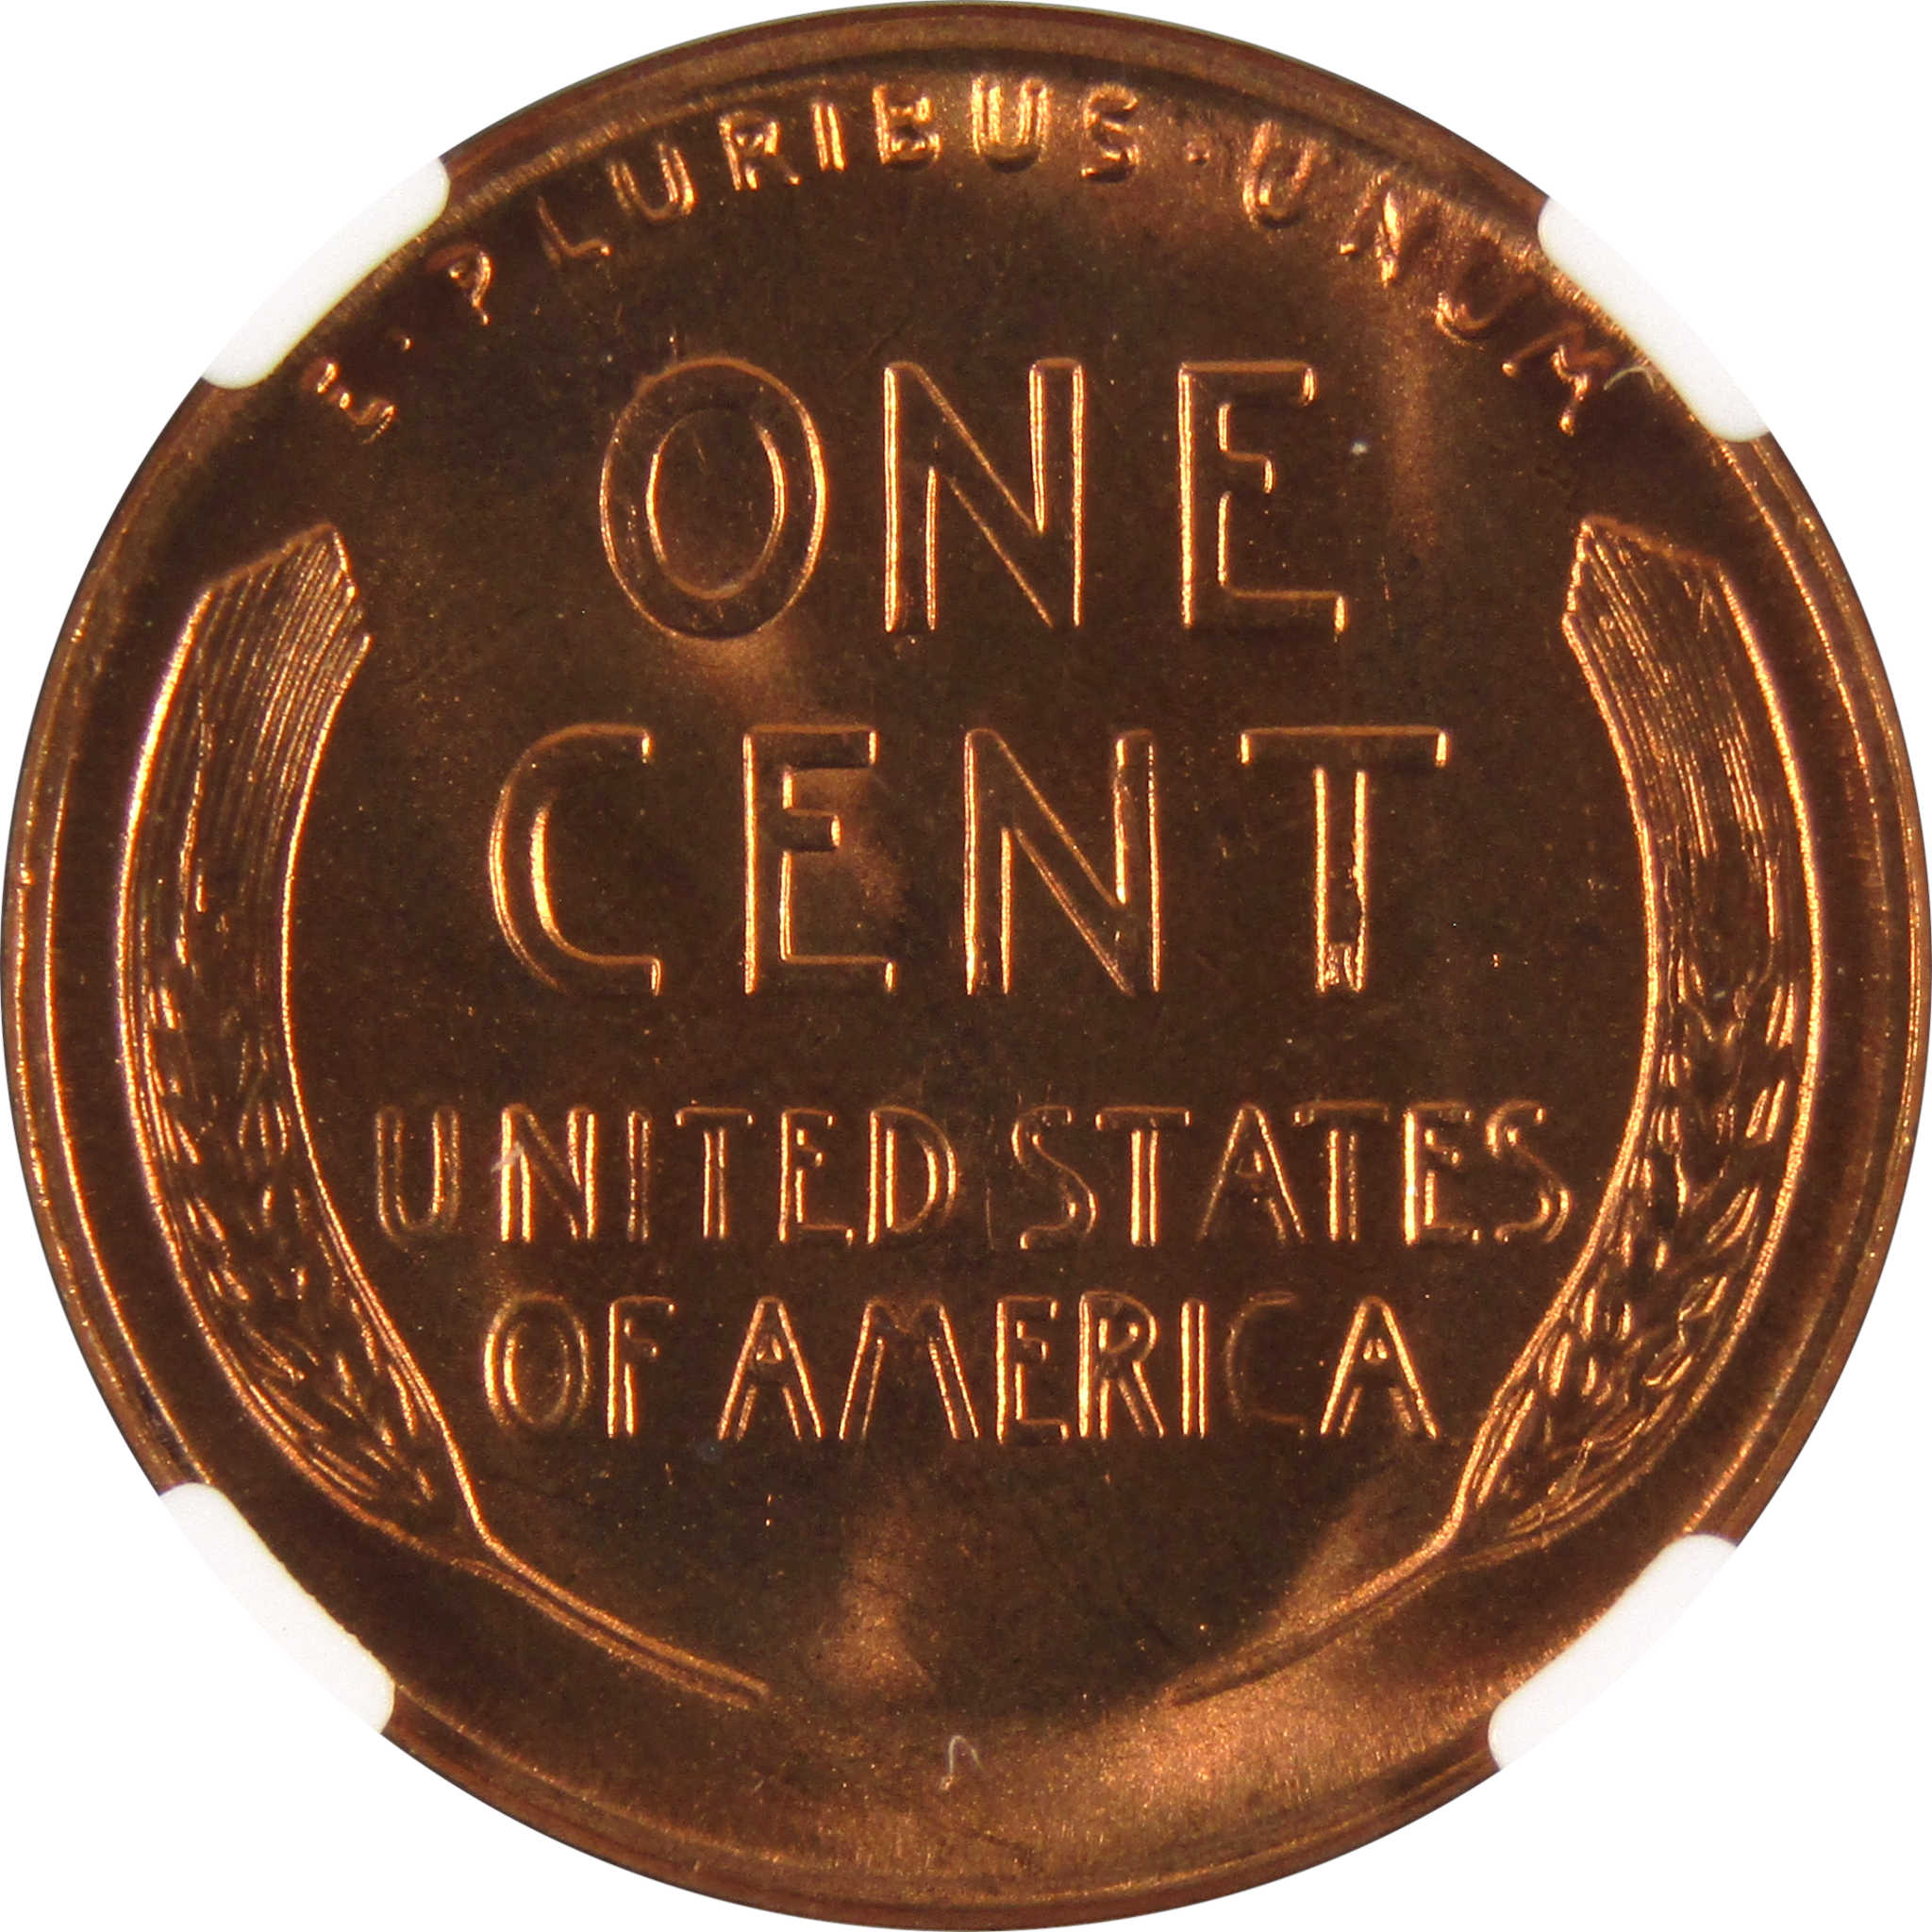 1955 S Lincoln Wheat Cent MS 66 RD NGC Penny 1c Uncirculated SKU:I8583